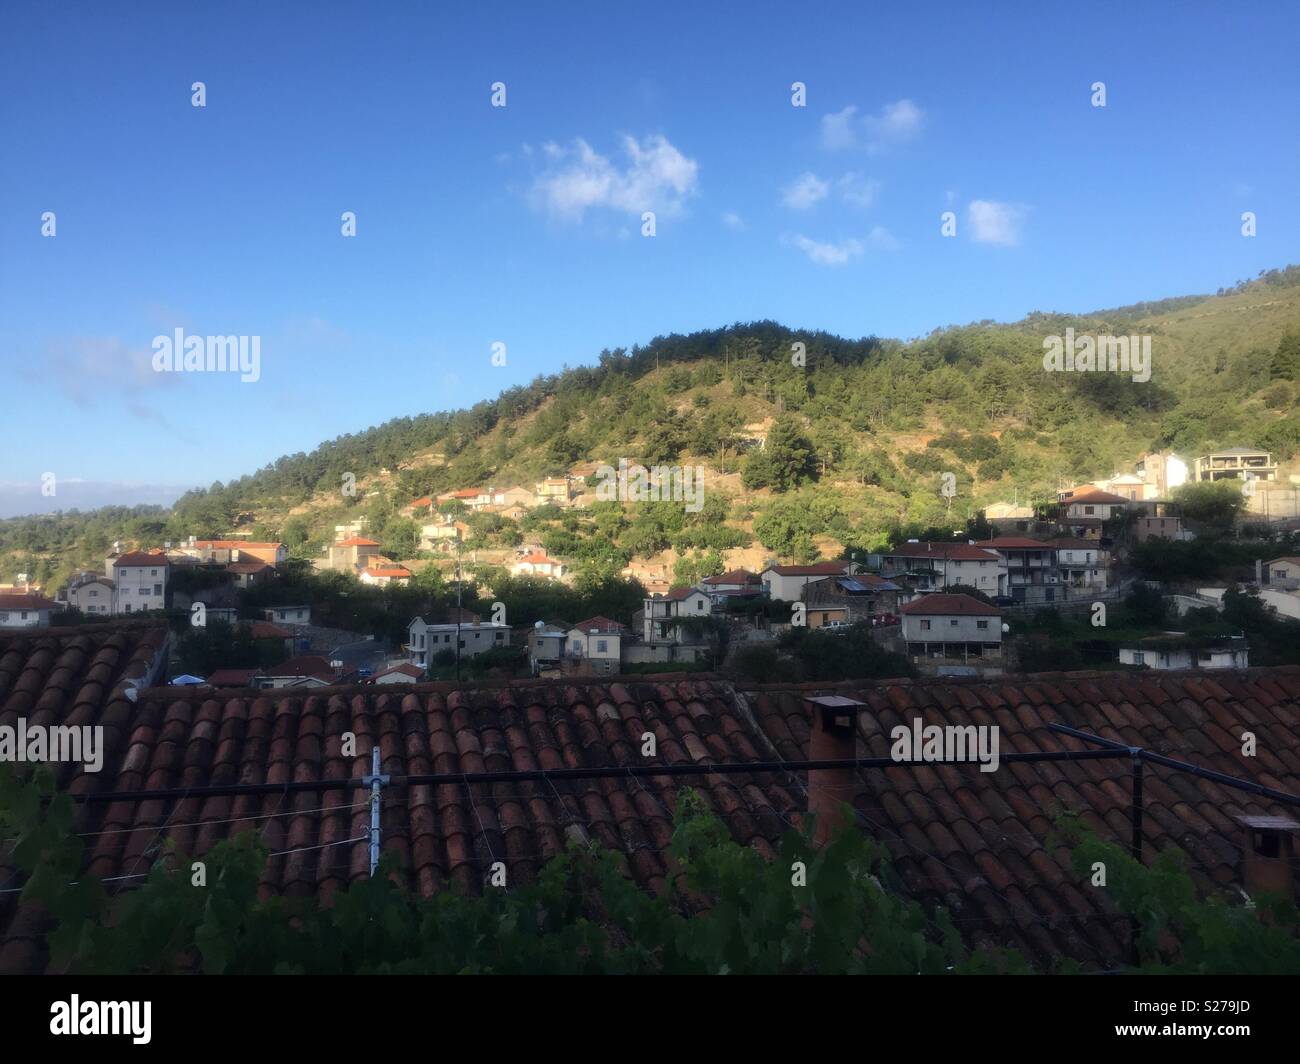 Morning in a village in the Troodos mountains Stock Photo